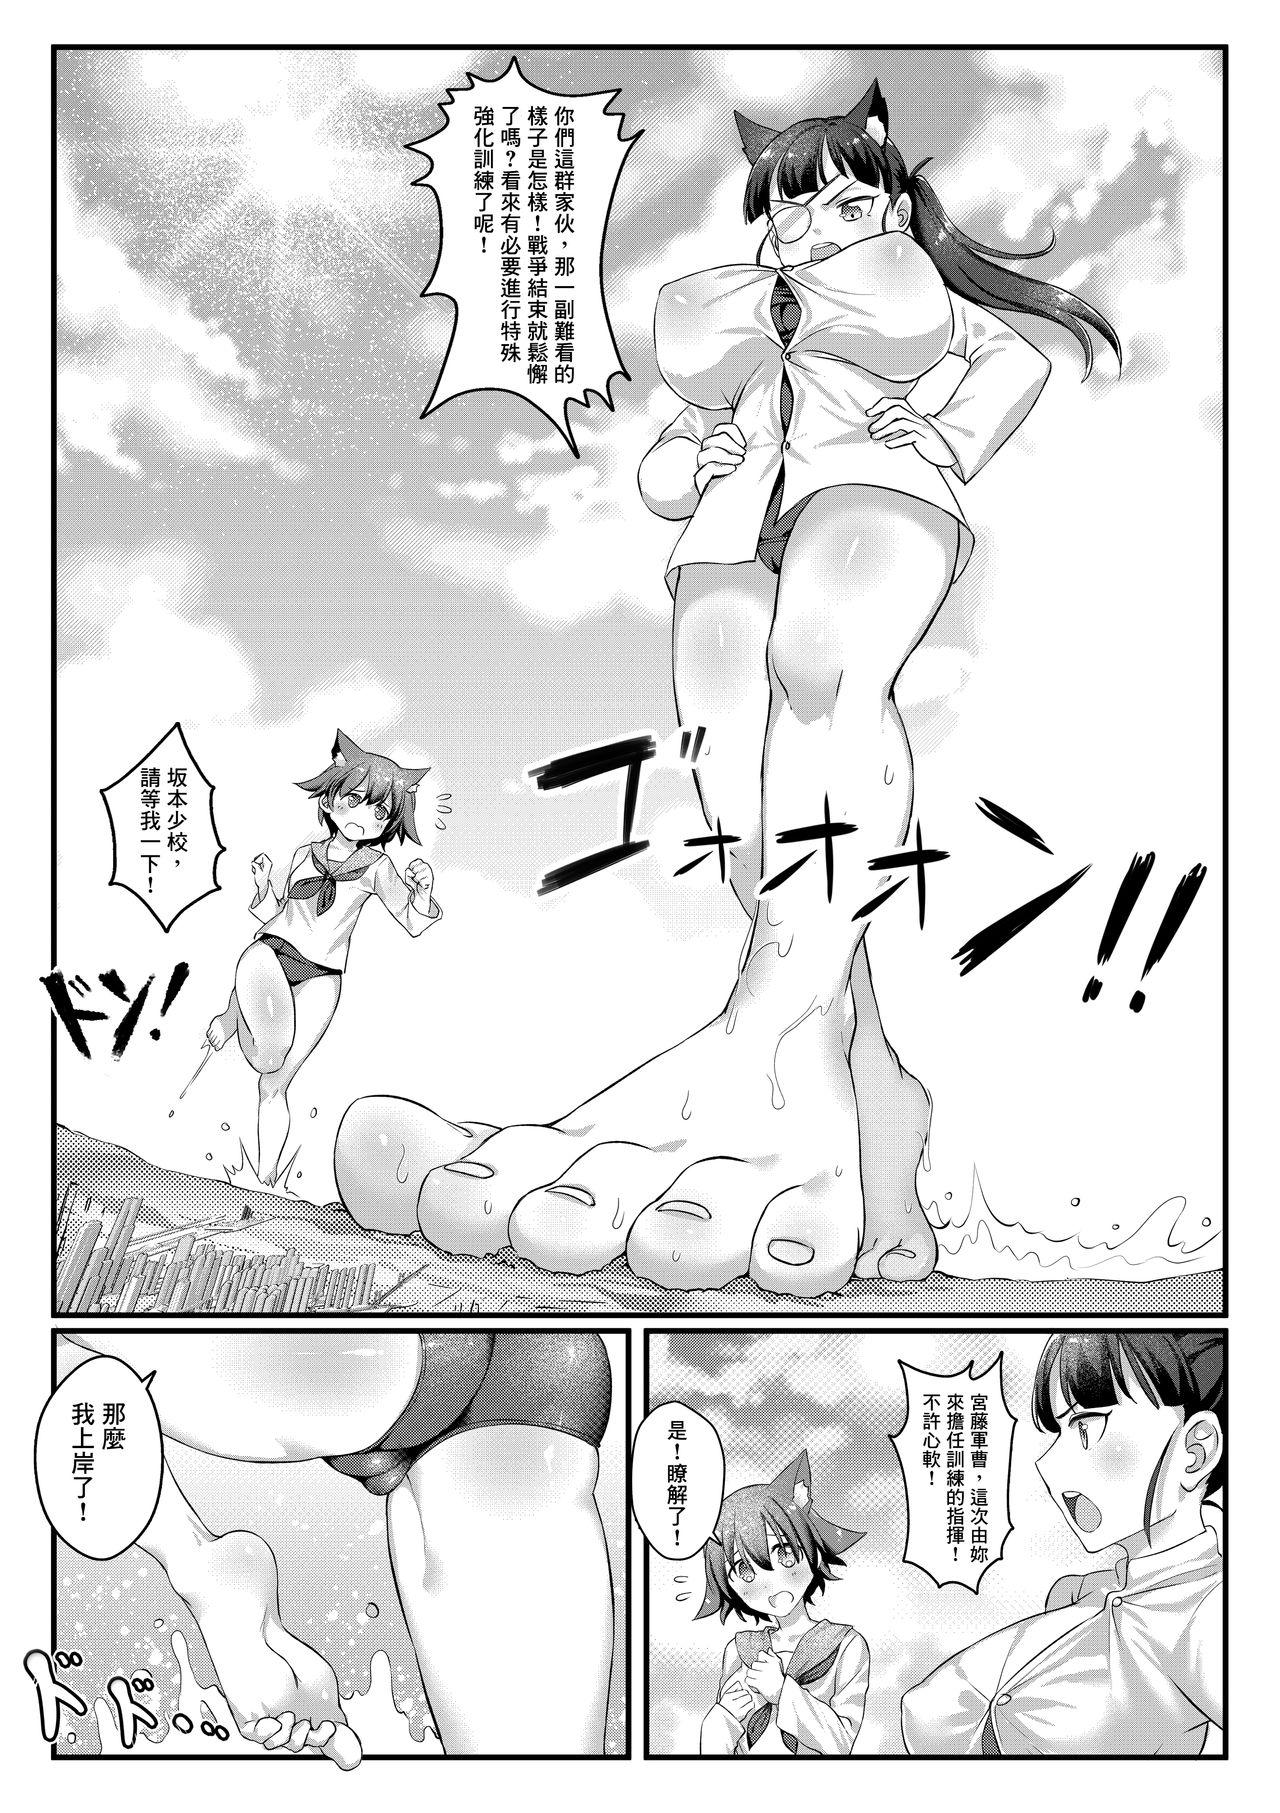 Butthole Air Strike!!! | 防空警報!!! - Strike witches Hairy - Page 4